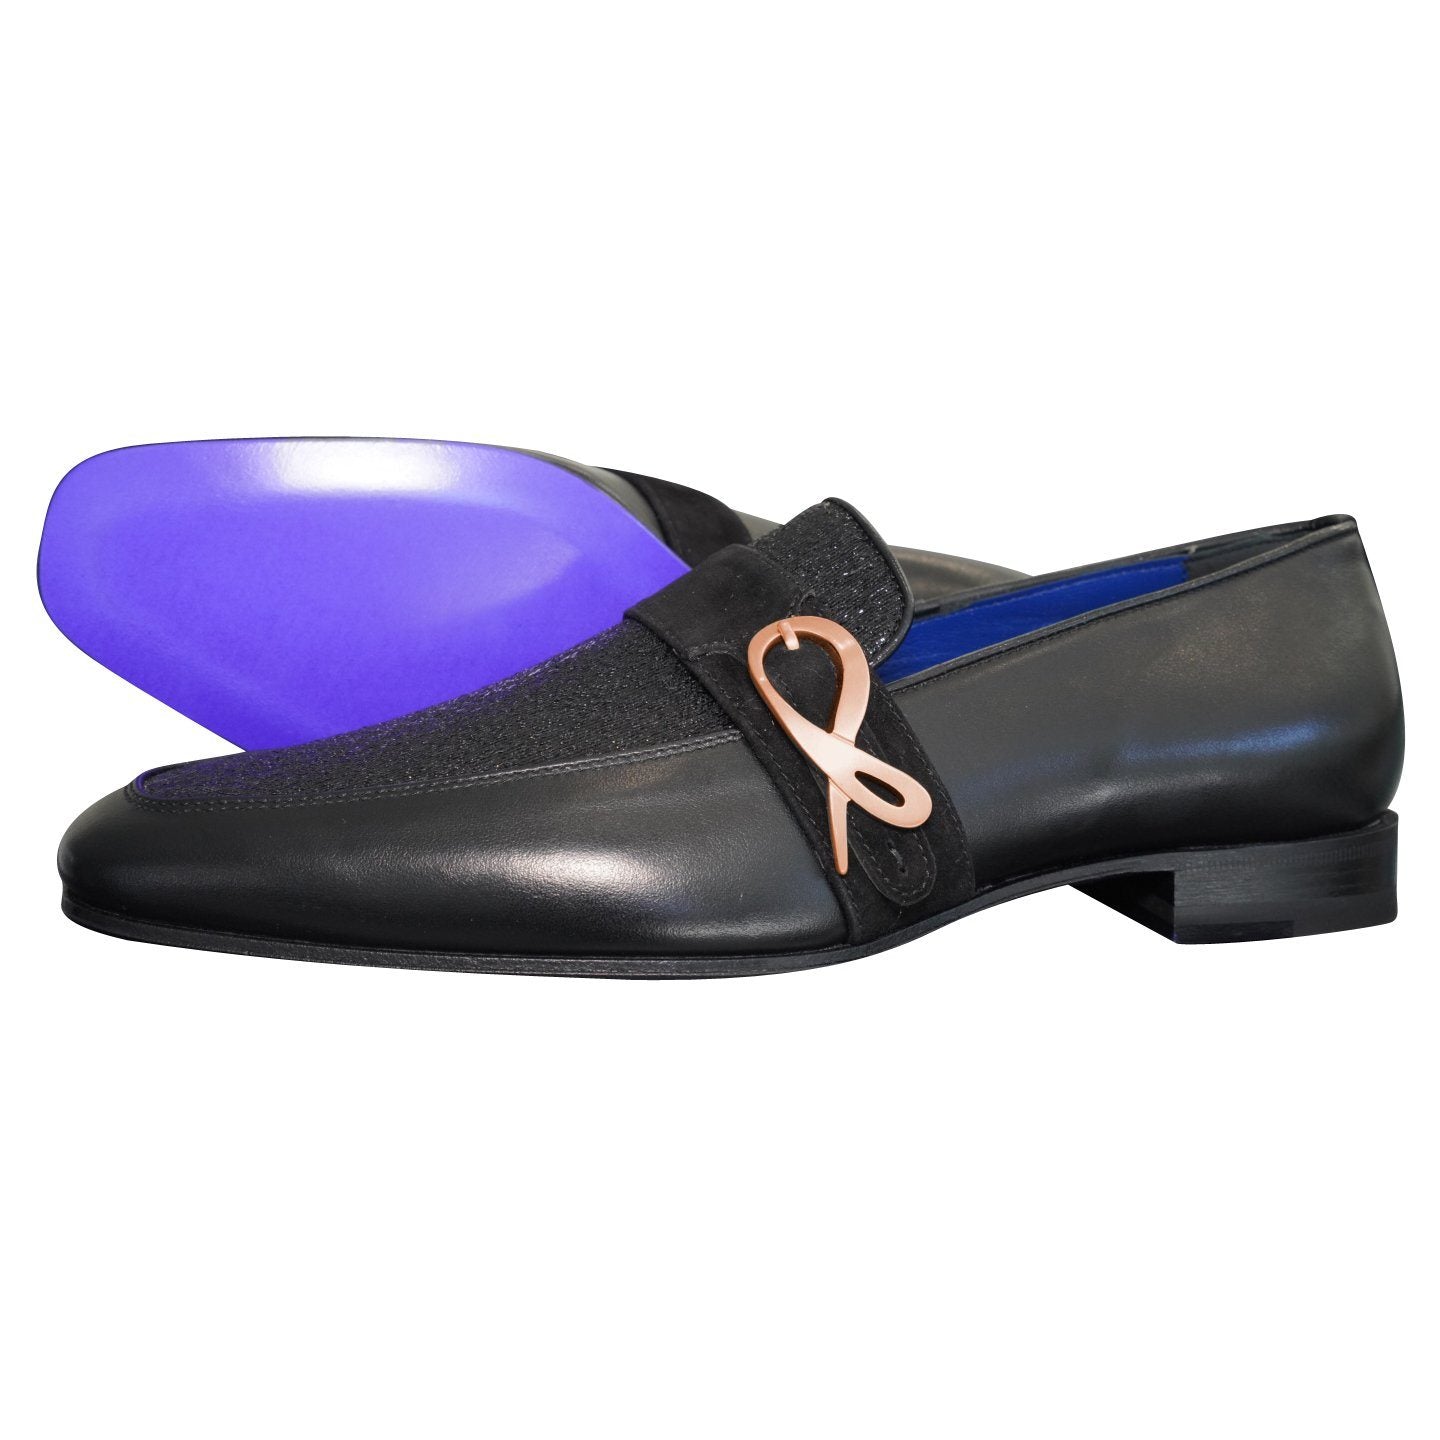 Black Diamante Leather Monk Rose Loafer